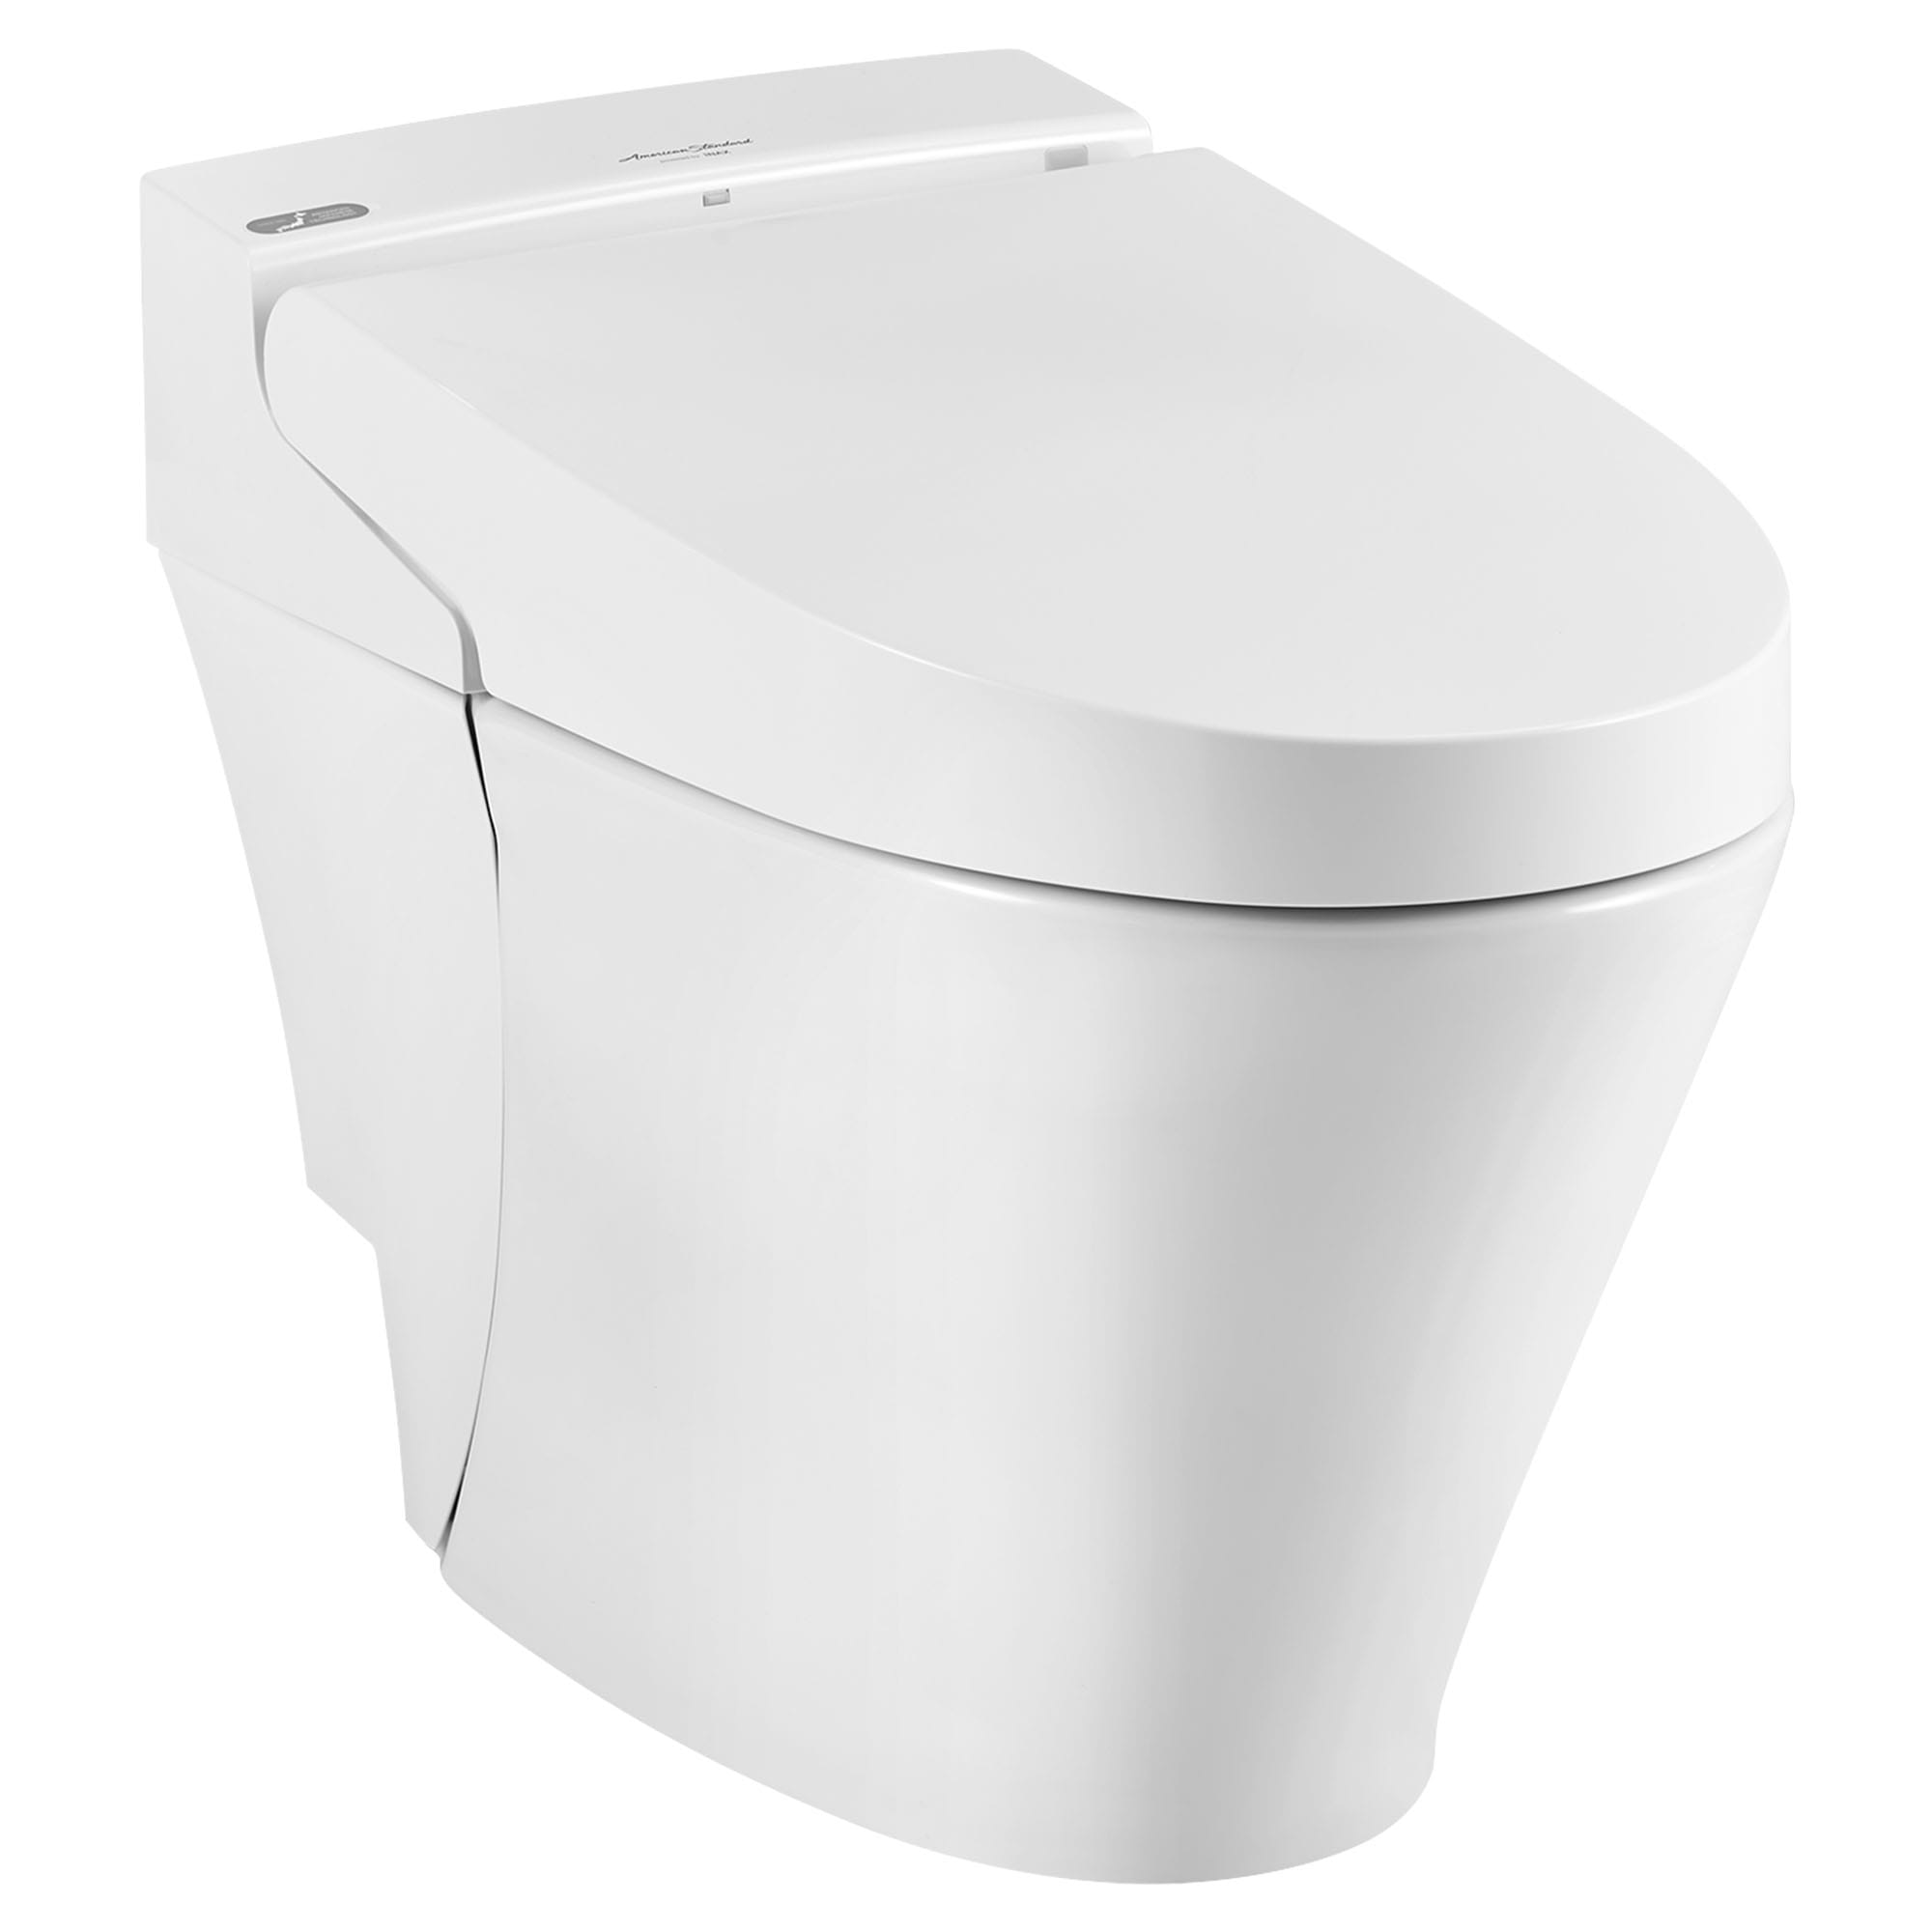 Toilette SpaLet Advanced Clean 100 Chasse double WaterSenseMD 132 - 092 gpc  49 - 34 lpc ALABASTER WHITE